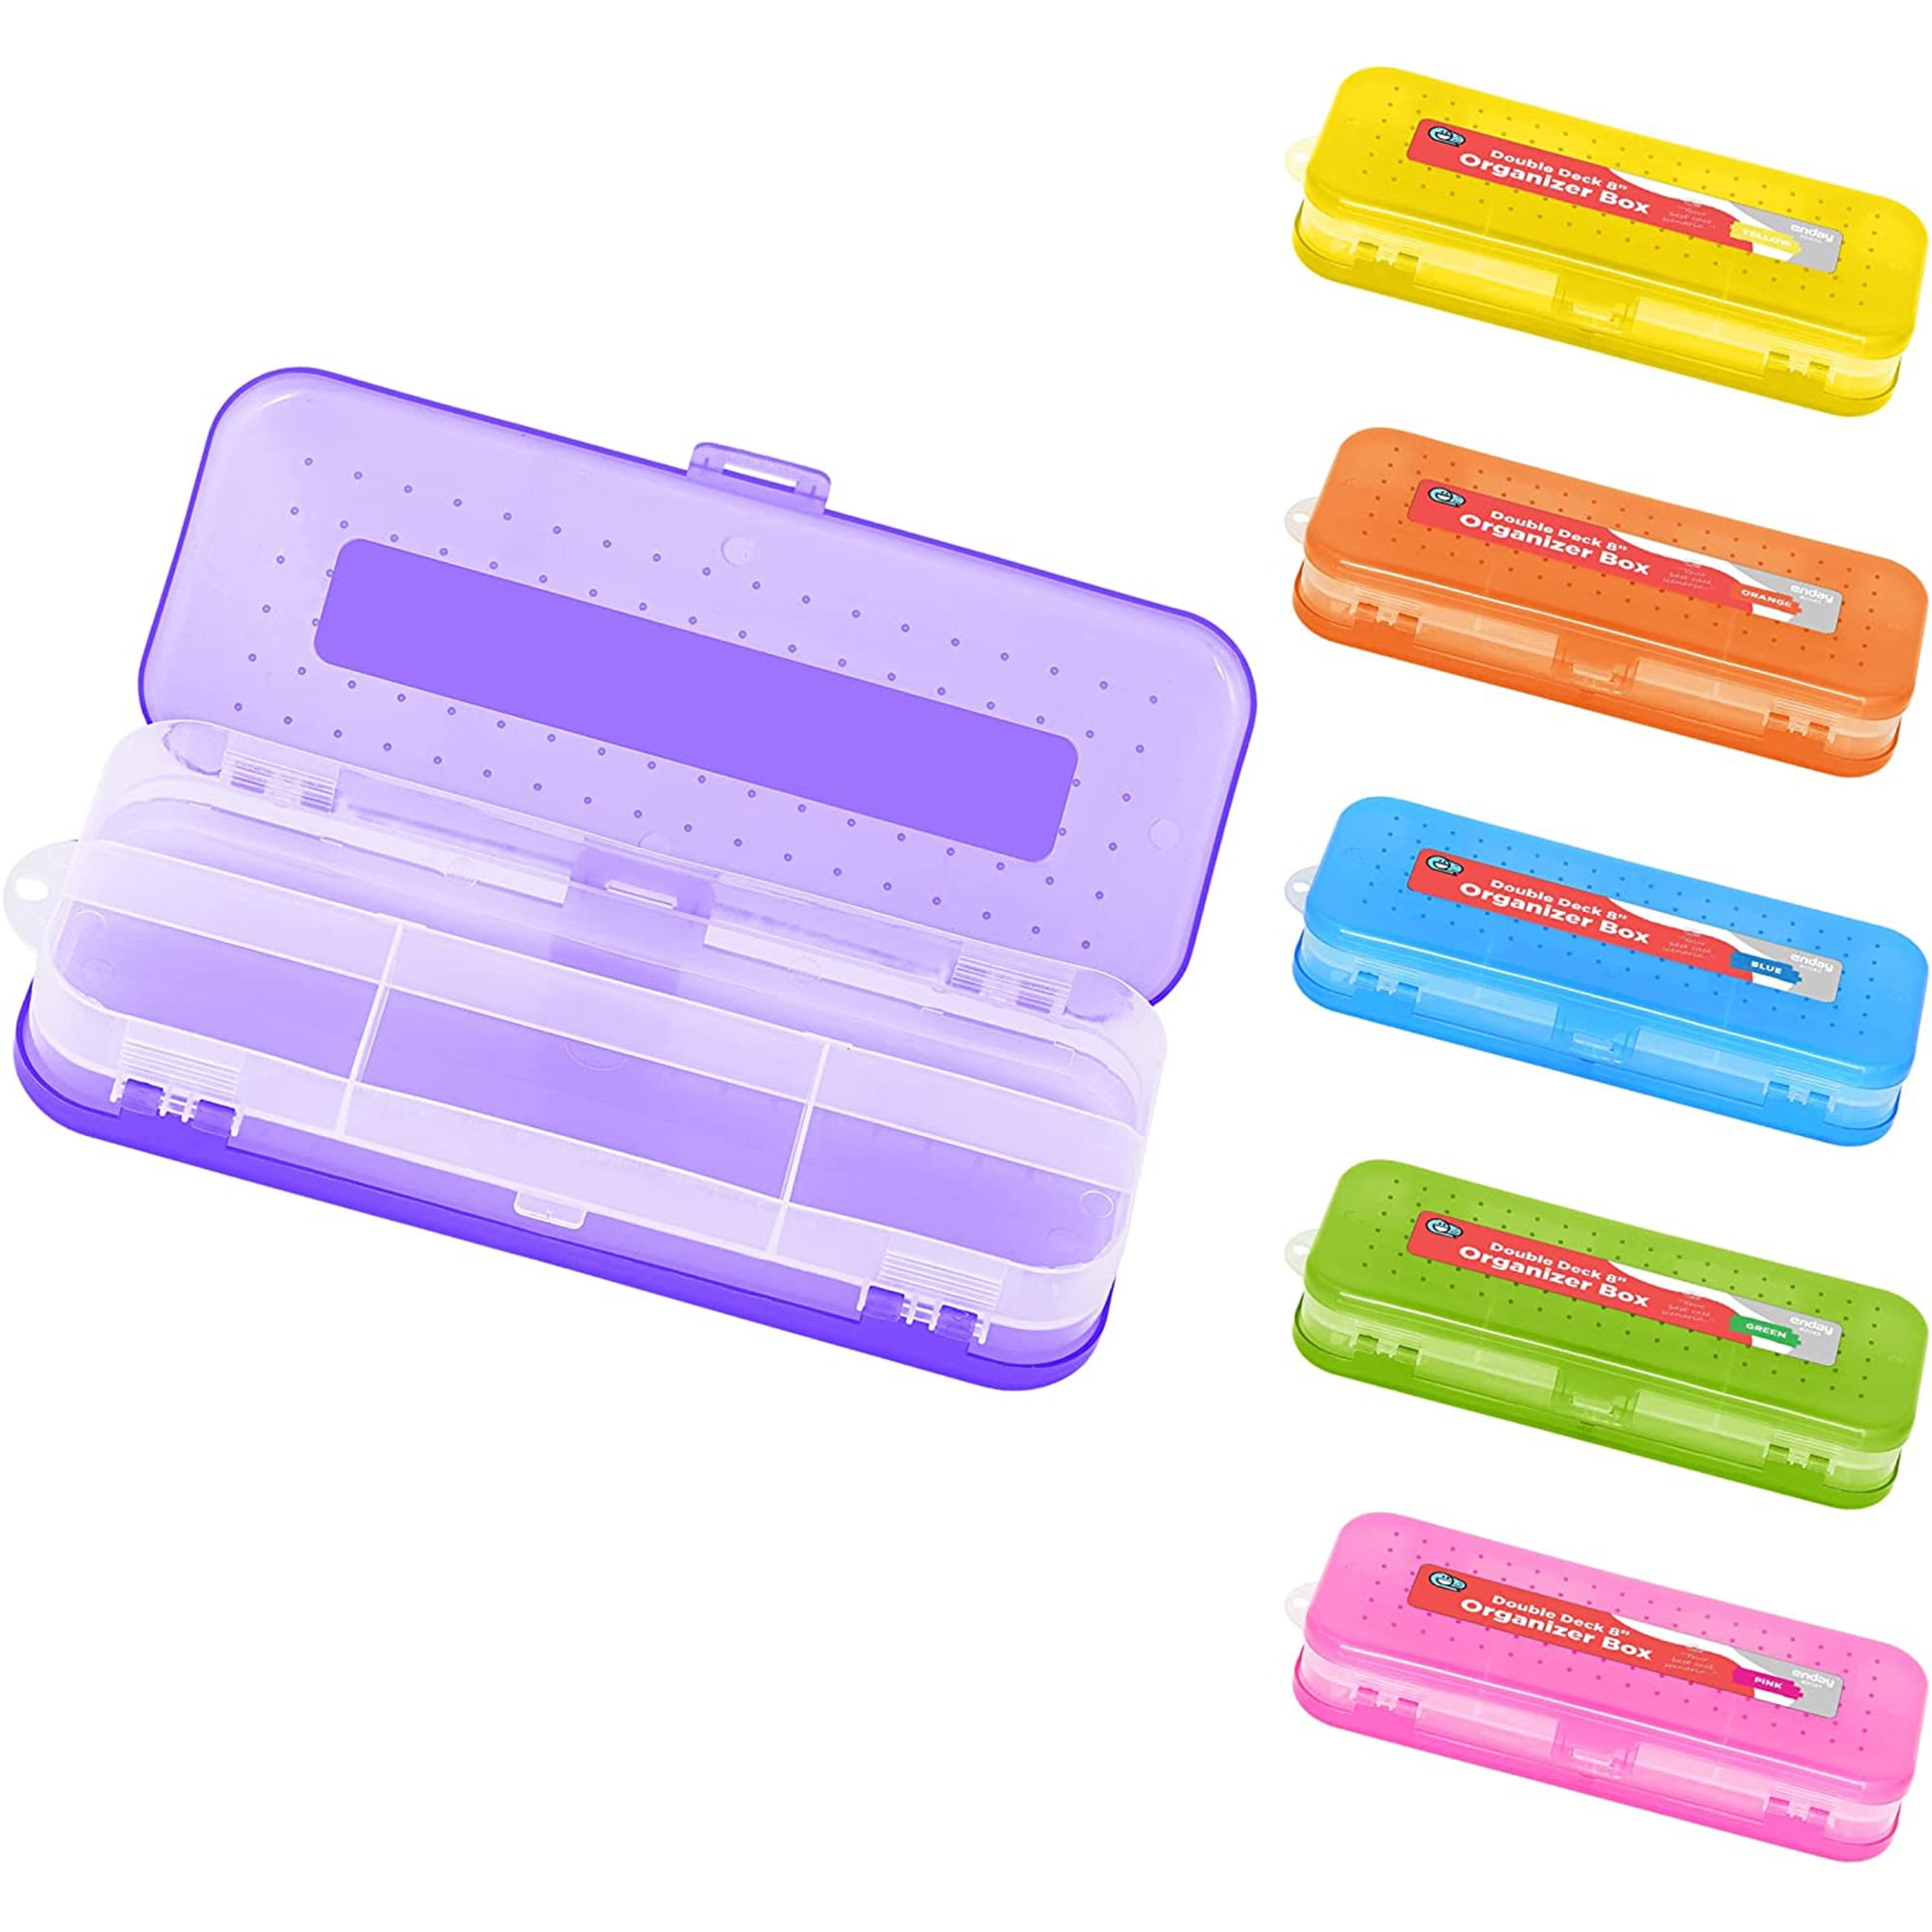 Enday Pencil Box Purple, Plastic Pencil Case, Multipurpose Storage Utility  Box Organizer with Snap Closure for Home and Office